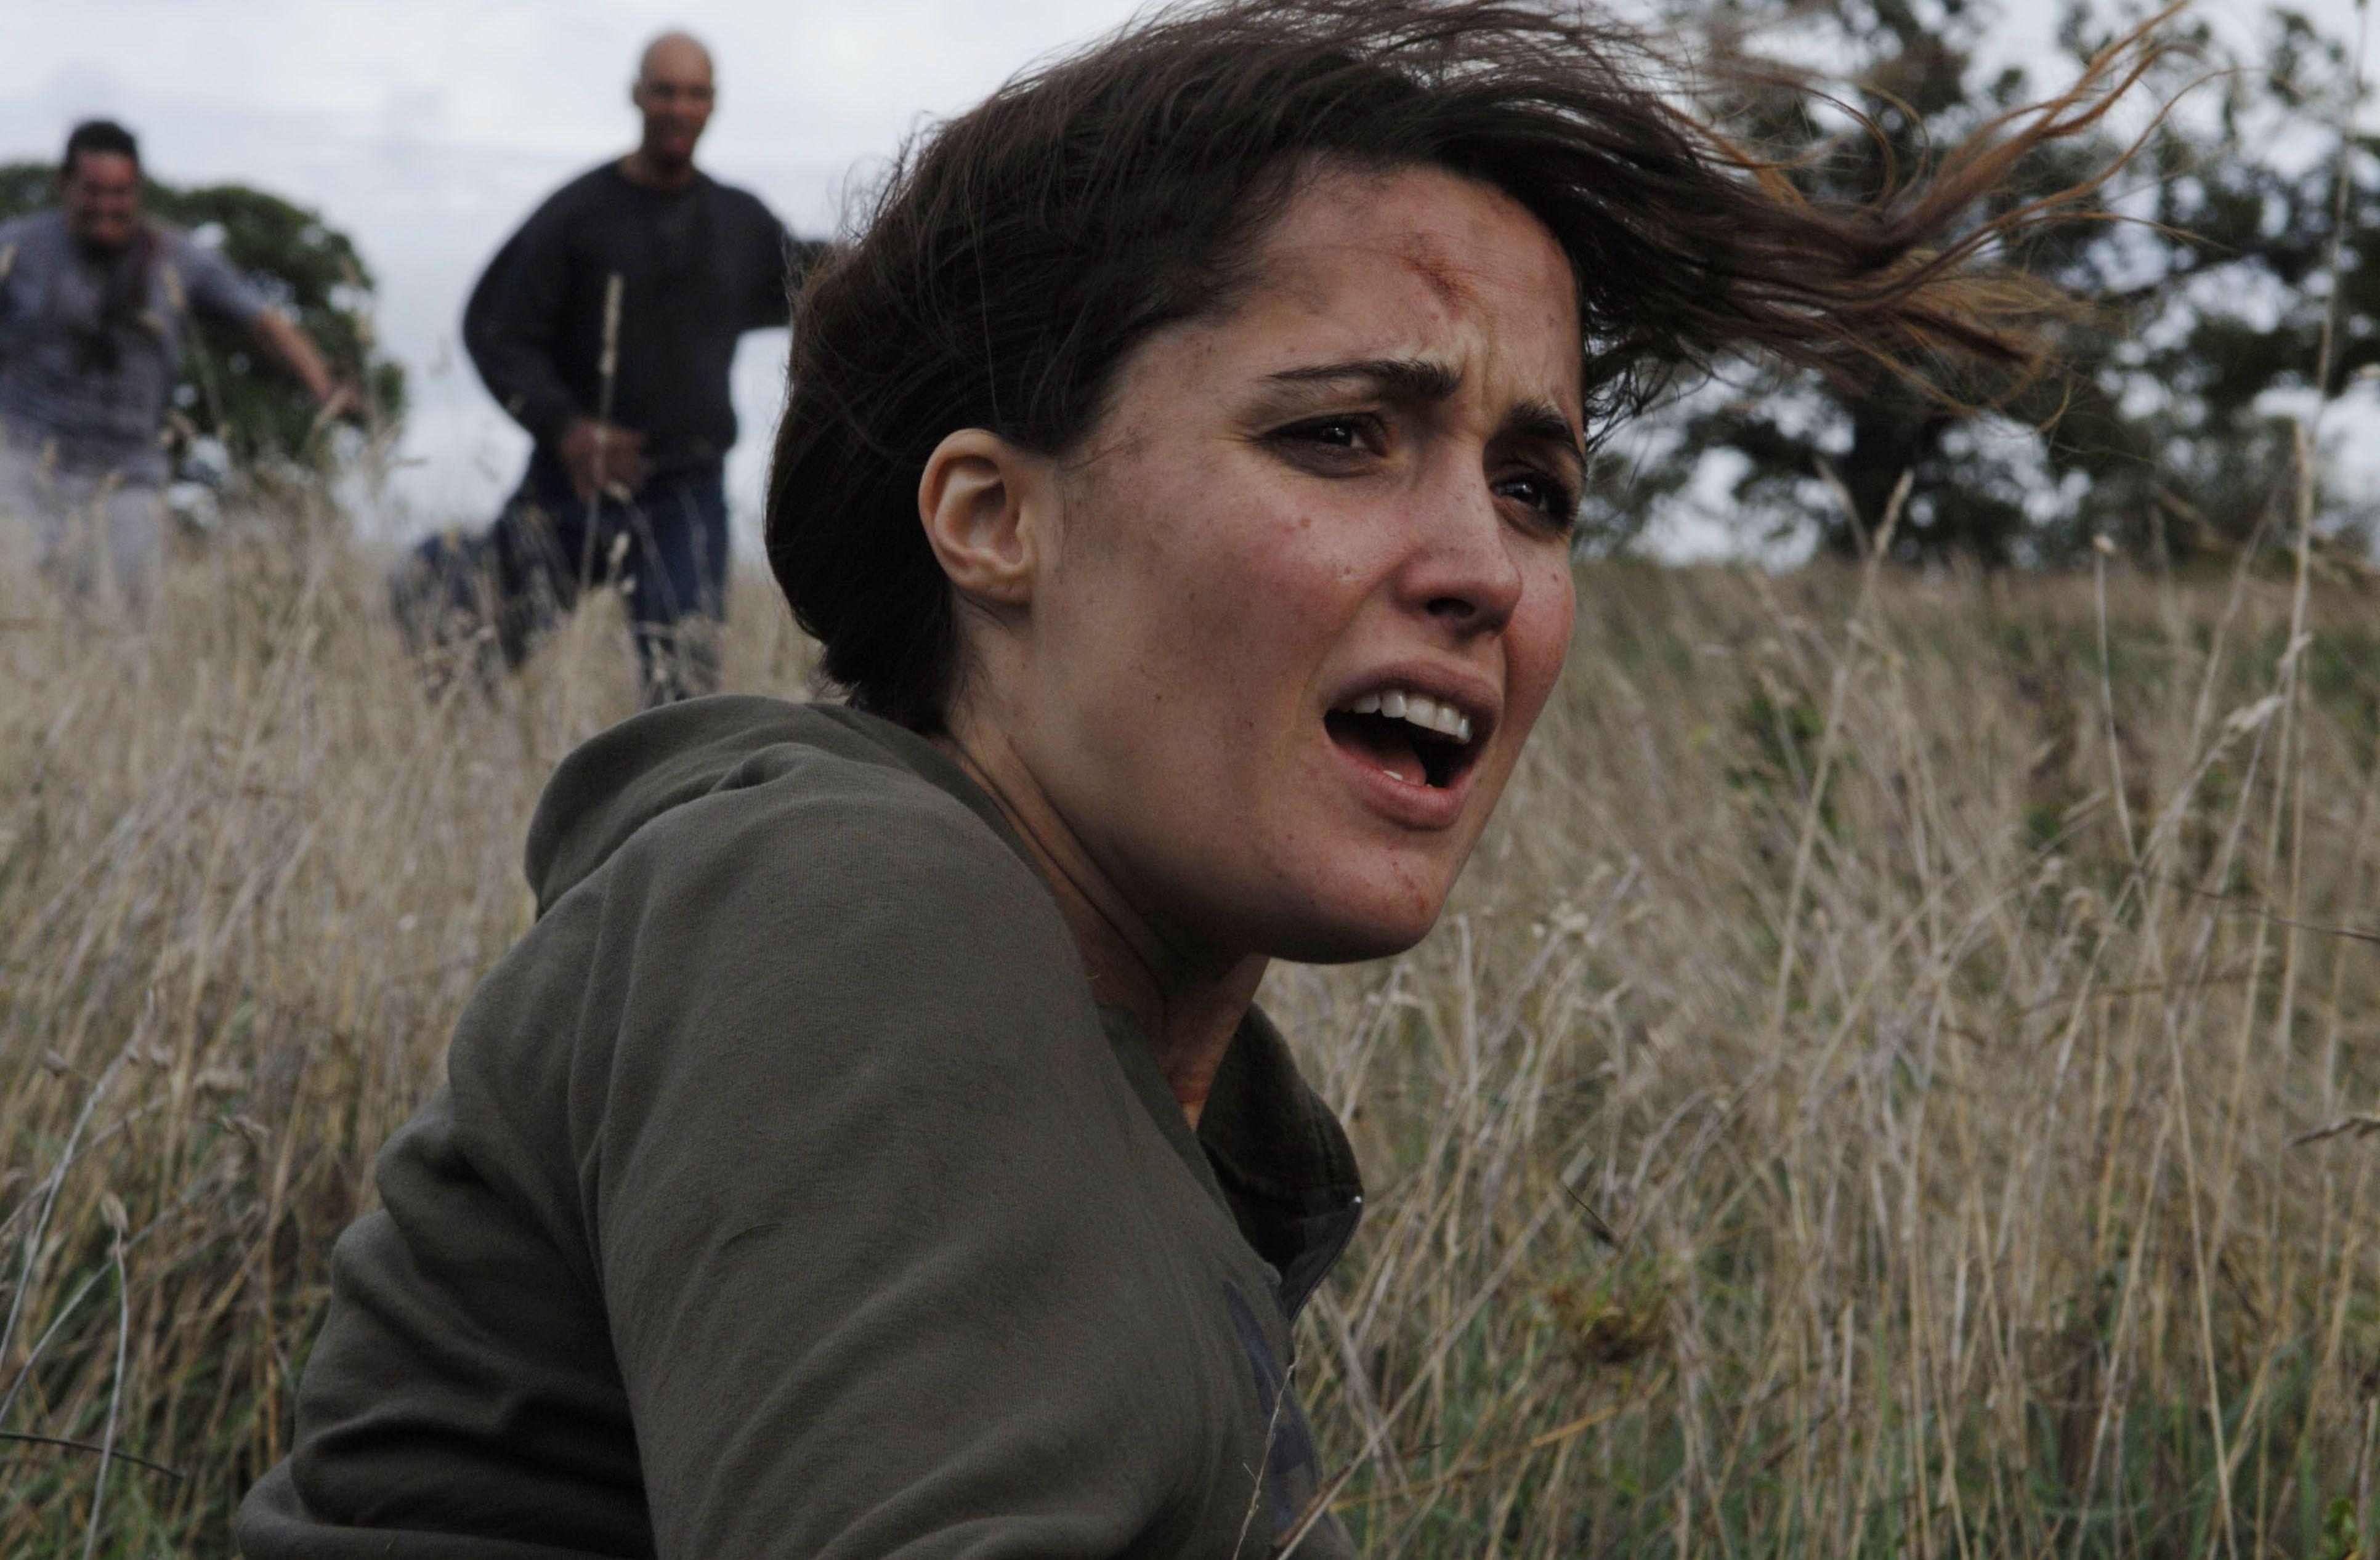 Rose Byrne sits in long grass while zombies run toward her